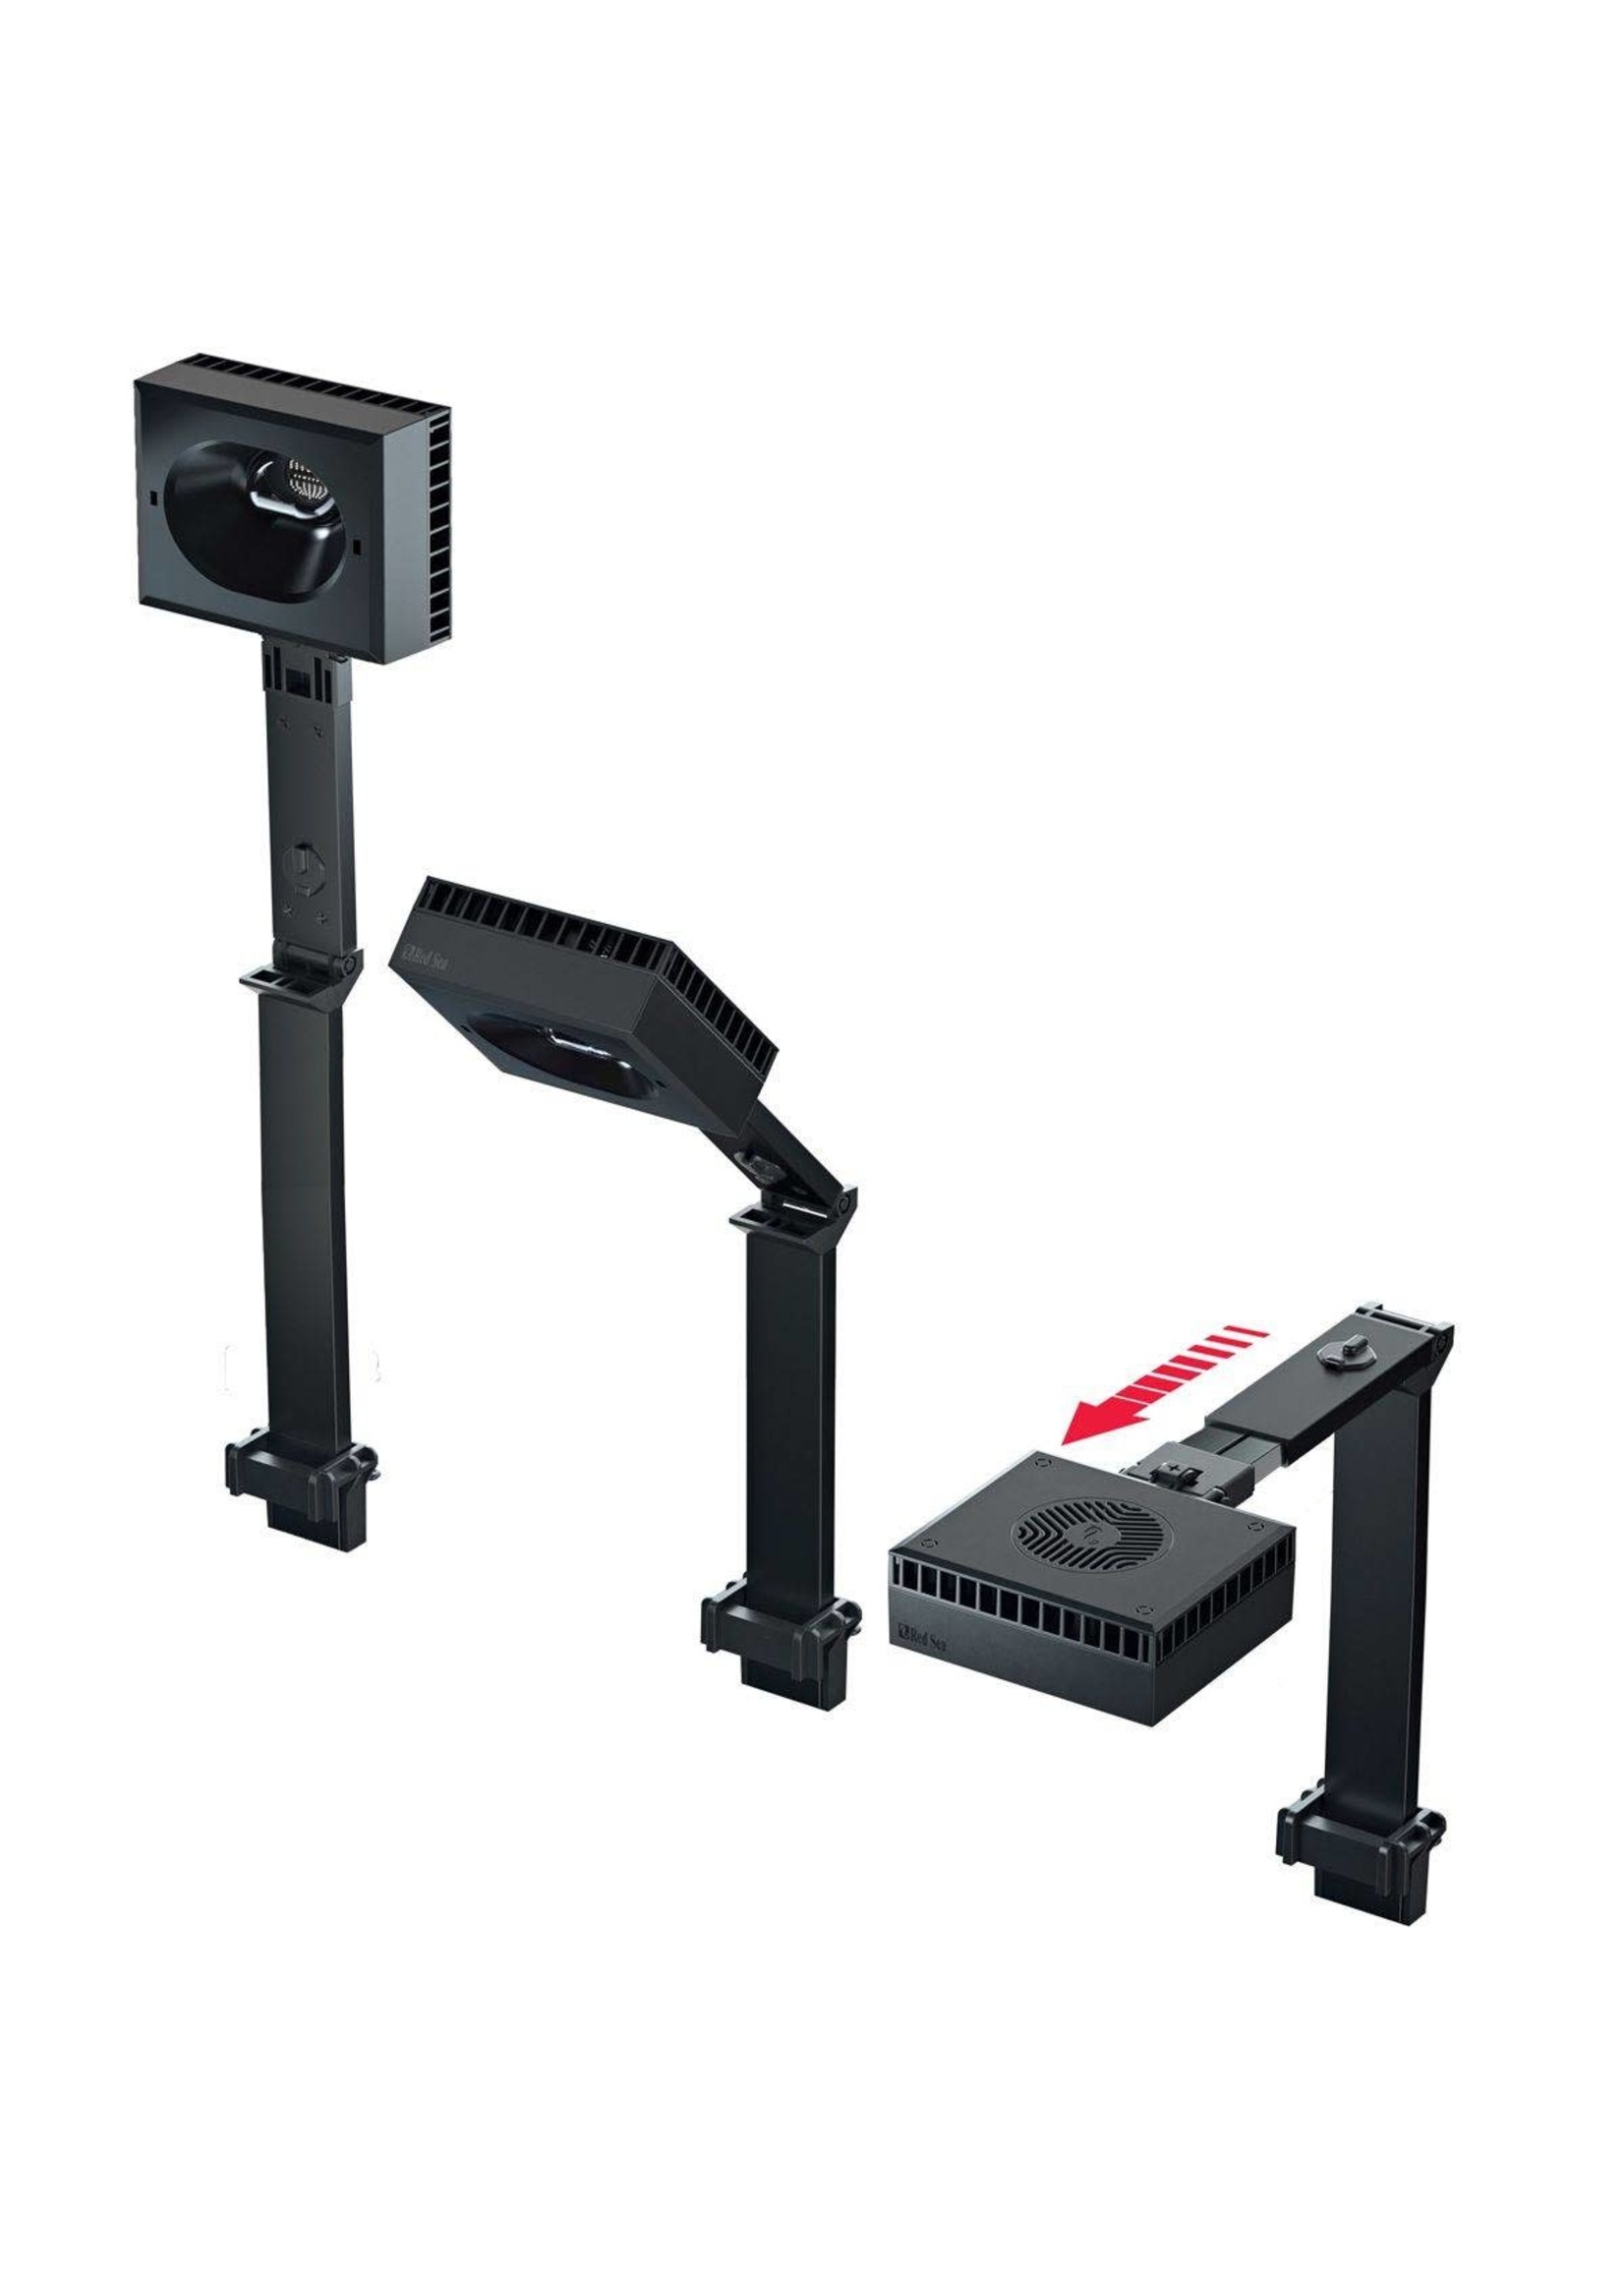 Red Sea REEF LED 160S UNIVERSAL MOUNTING ARM